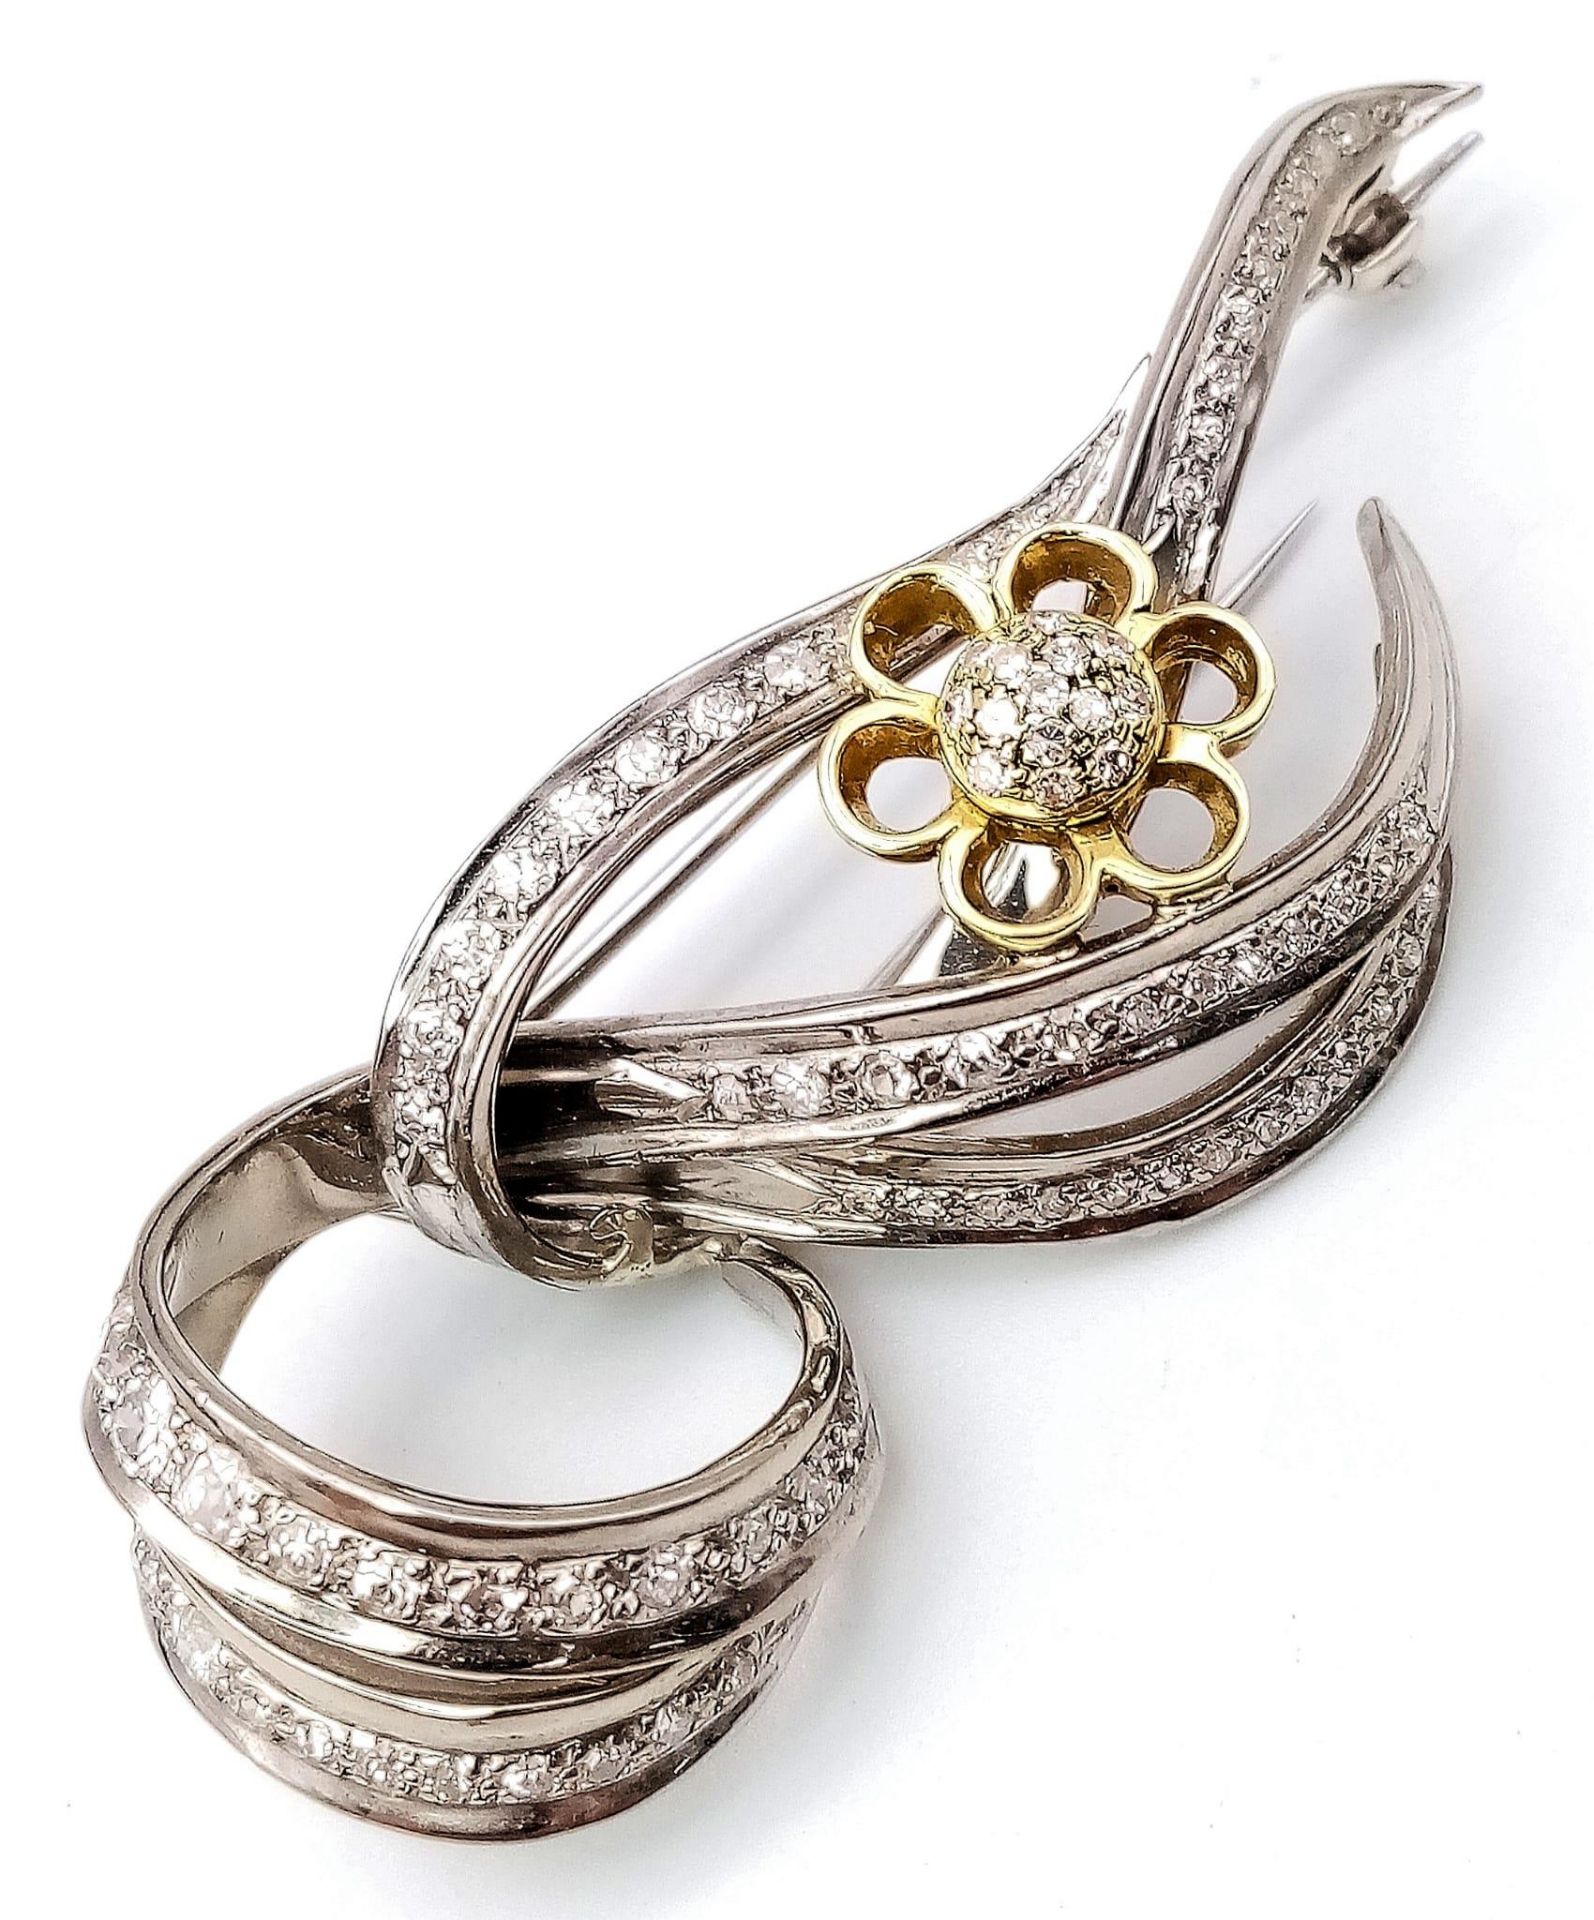 Diamond encrusted 18kt White & Yellow Gold Brooch. Beautifully woven White Gold design, adorned with